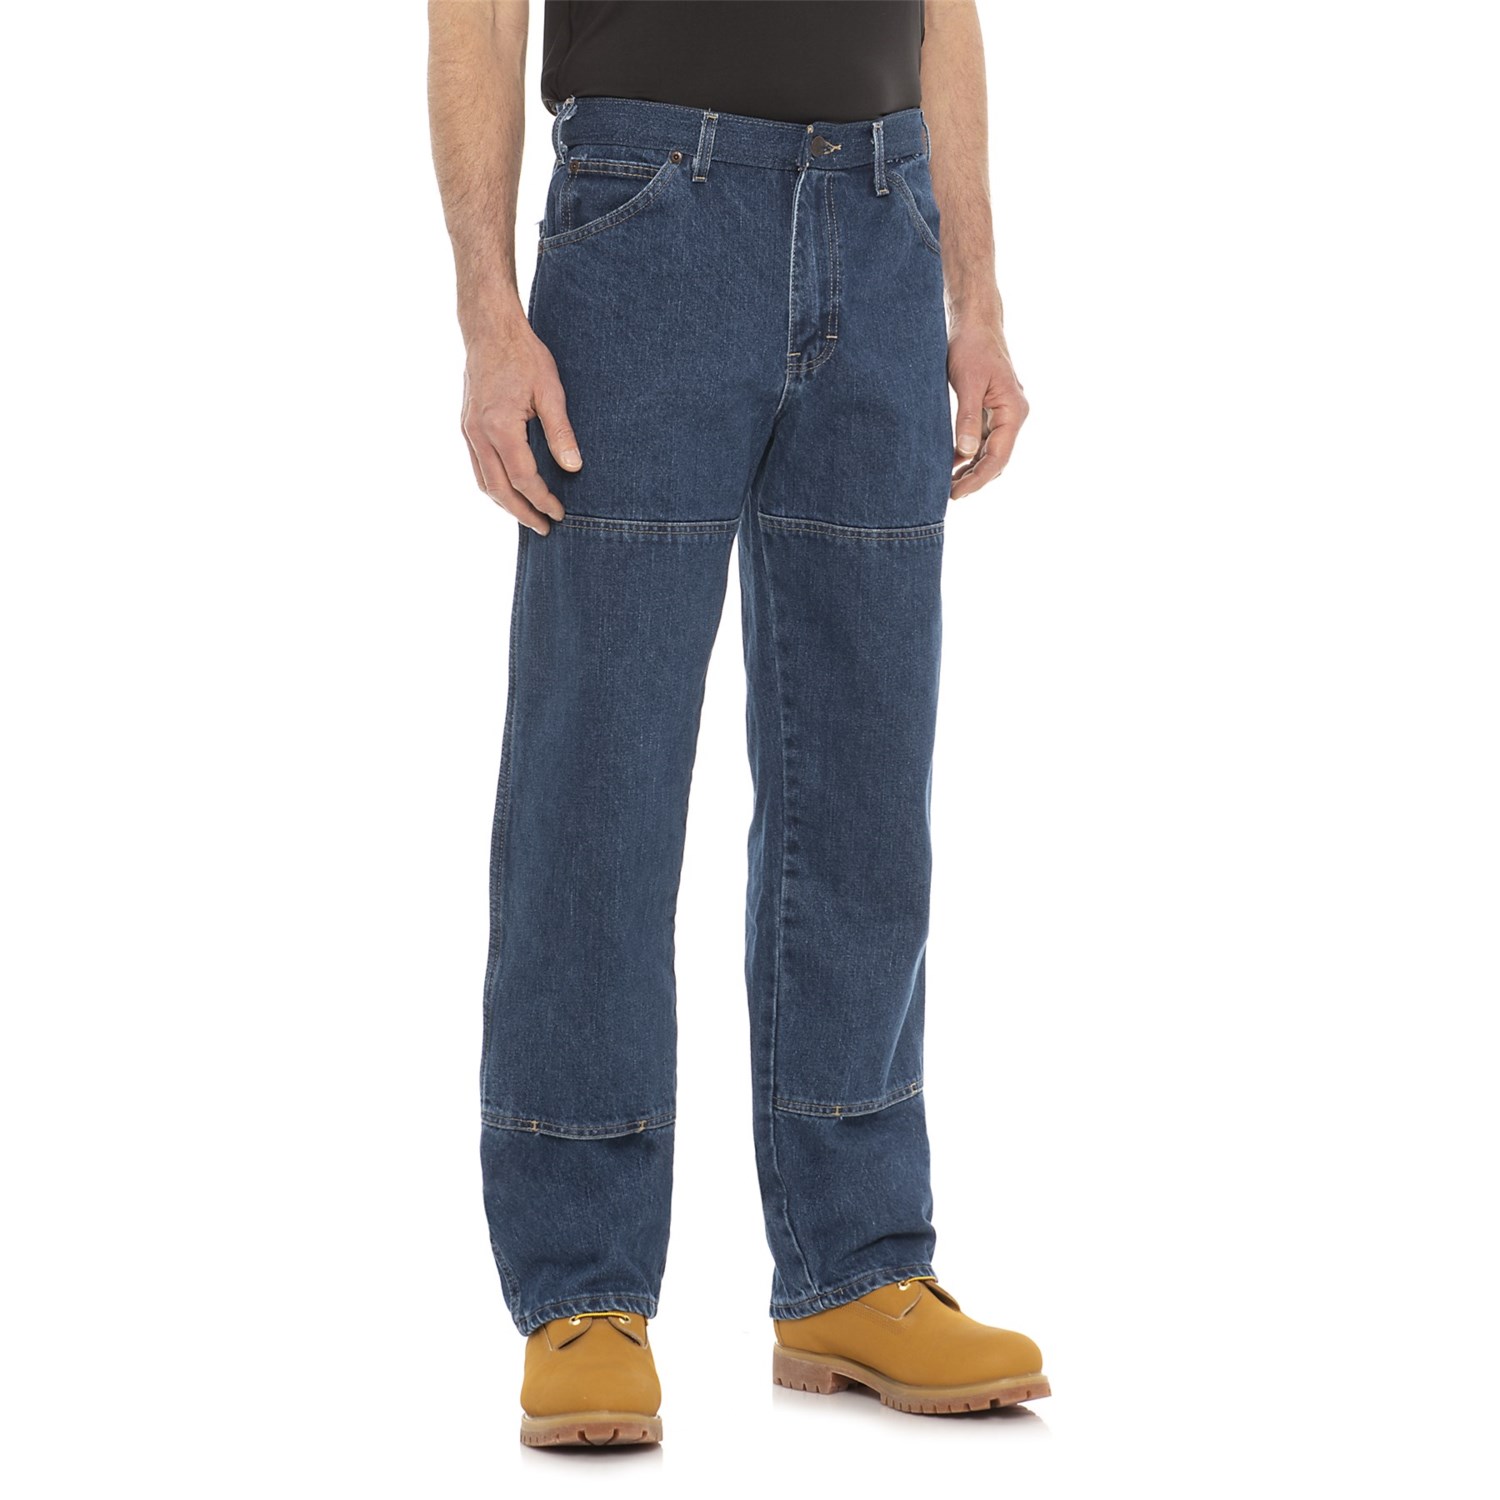 Dickies Workhorse Double-Knee Jeans (For Men) - Save 62%